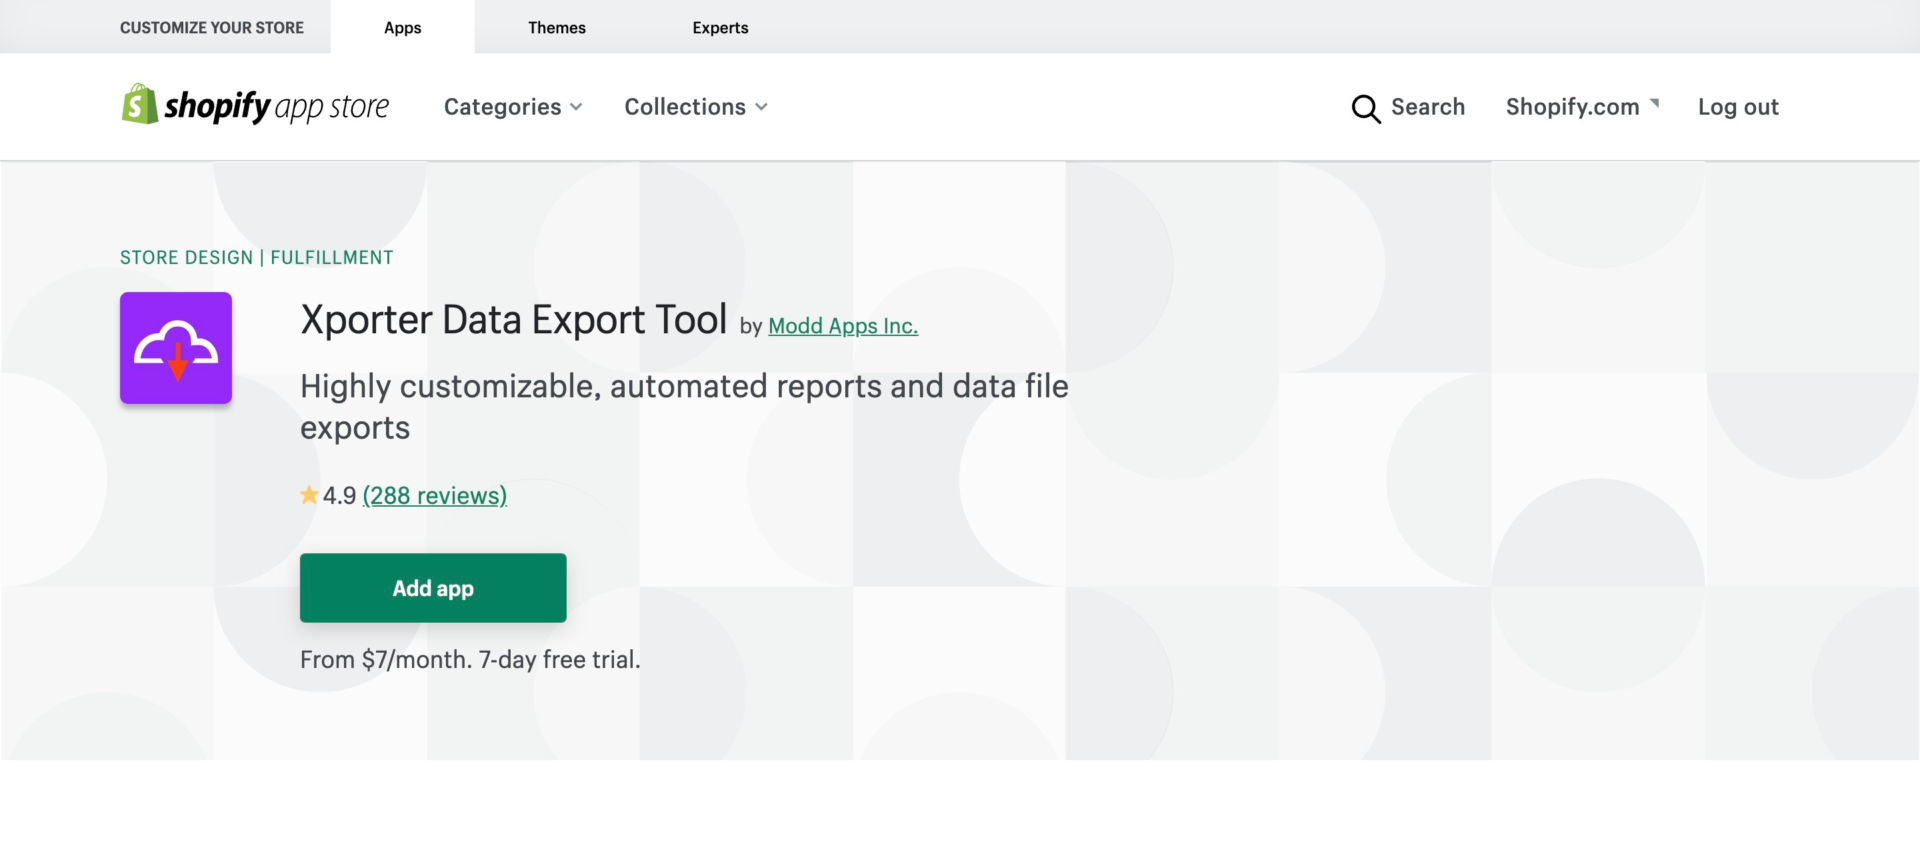 best Shopify dropshipping apps: Xporter Data Export Tool 